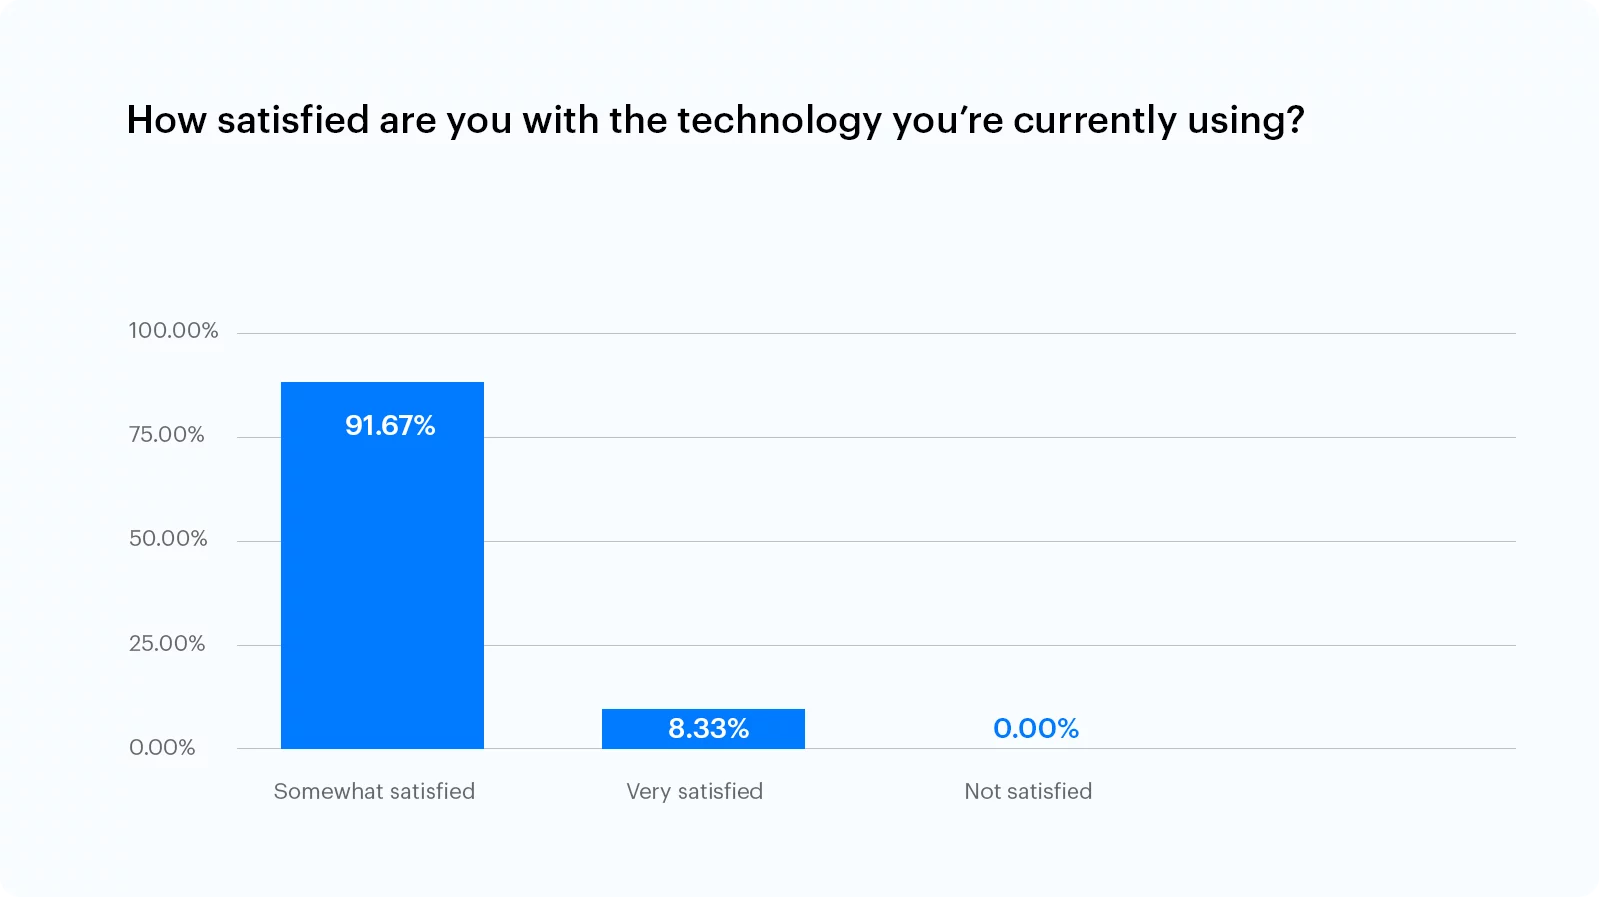 How satisfied are you with the technology you're currently using?